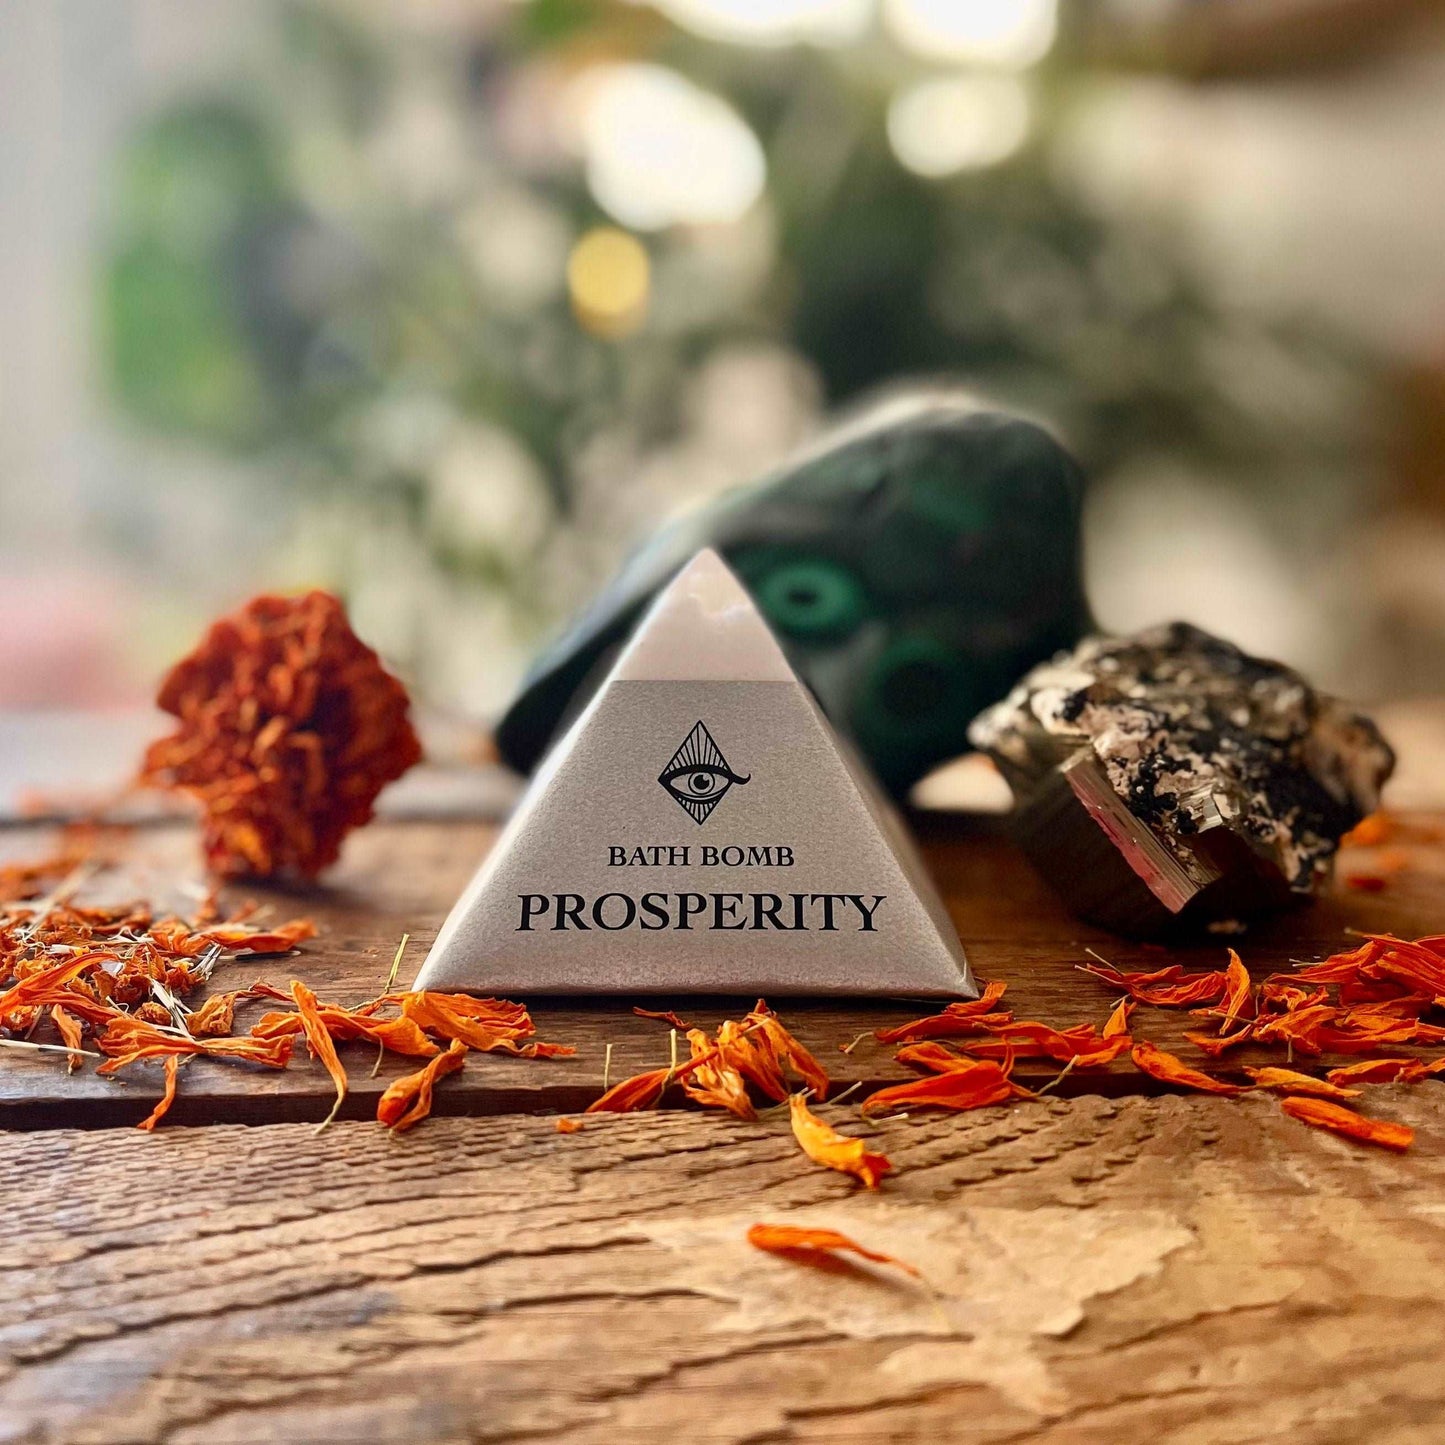 Invite abundance into your bath ritual with our Prosperity Bath Bomb, crafted with a blend of organic Patchouli, Orange, and Clove essential oils. Immerse yourself in the opulent scents as you soak, embracing a sense of prosperity and positive energy. Indulge in the luxurious ingredients that nurture both your body and spirit, creating a bathing experience filled with richness and intention.